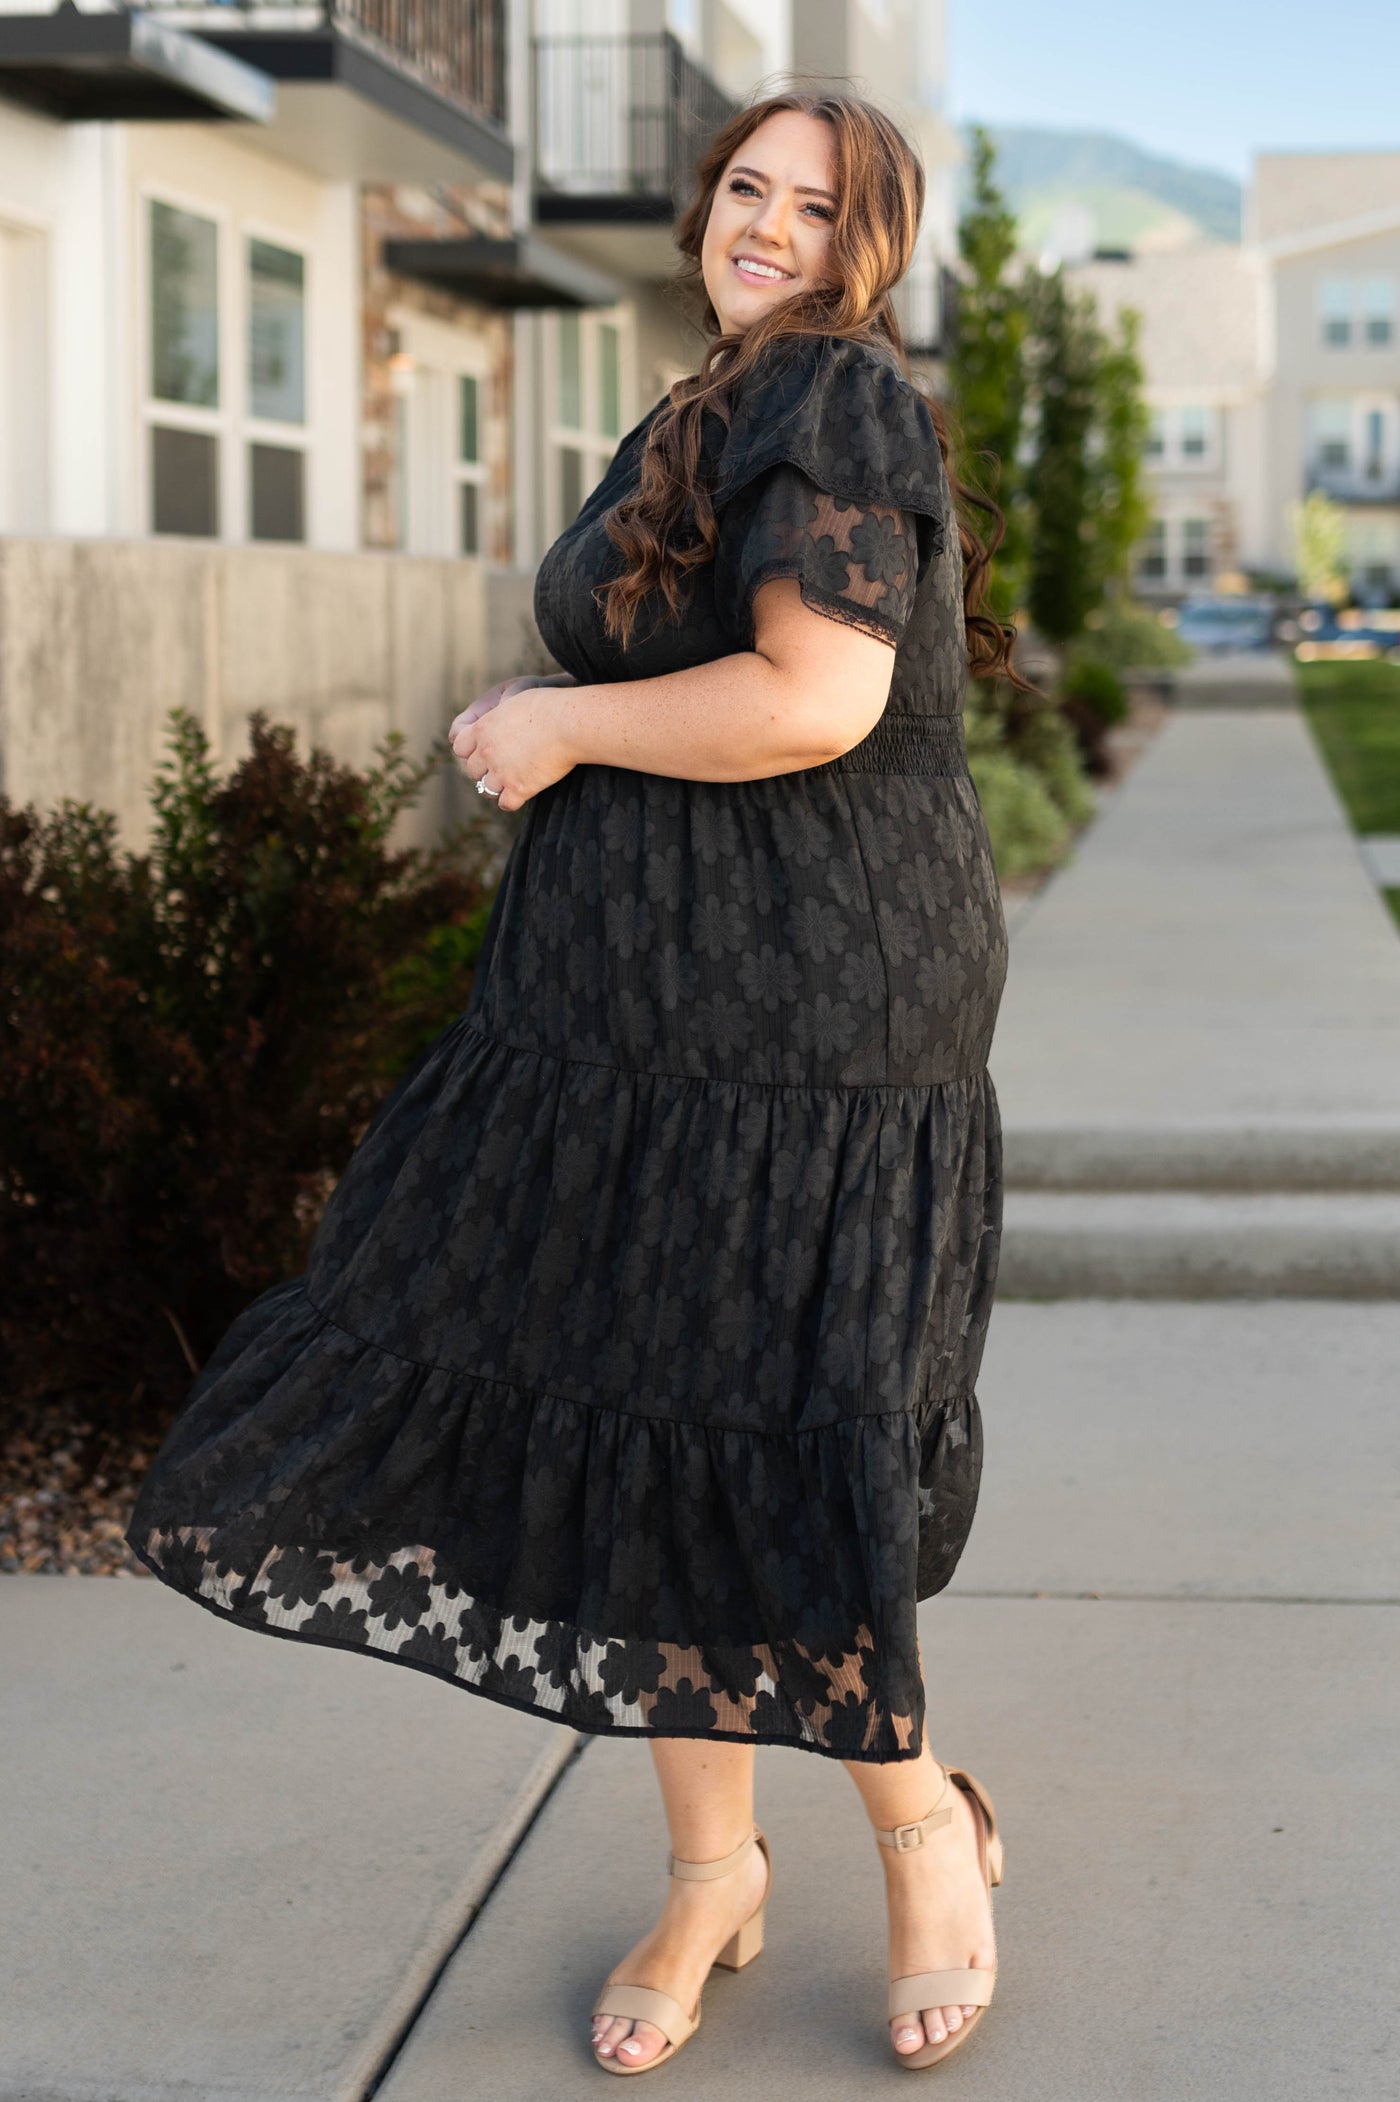 Plus size black floral dress with tiered skirt